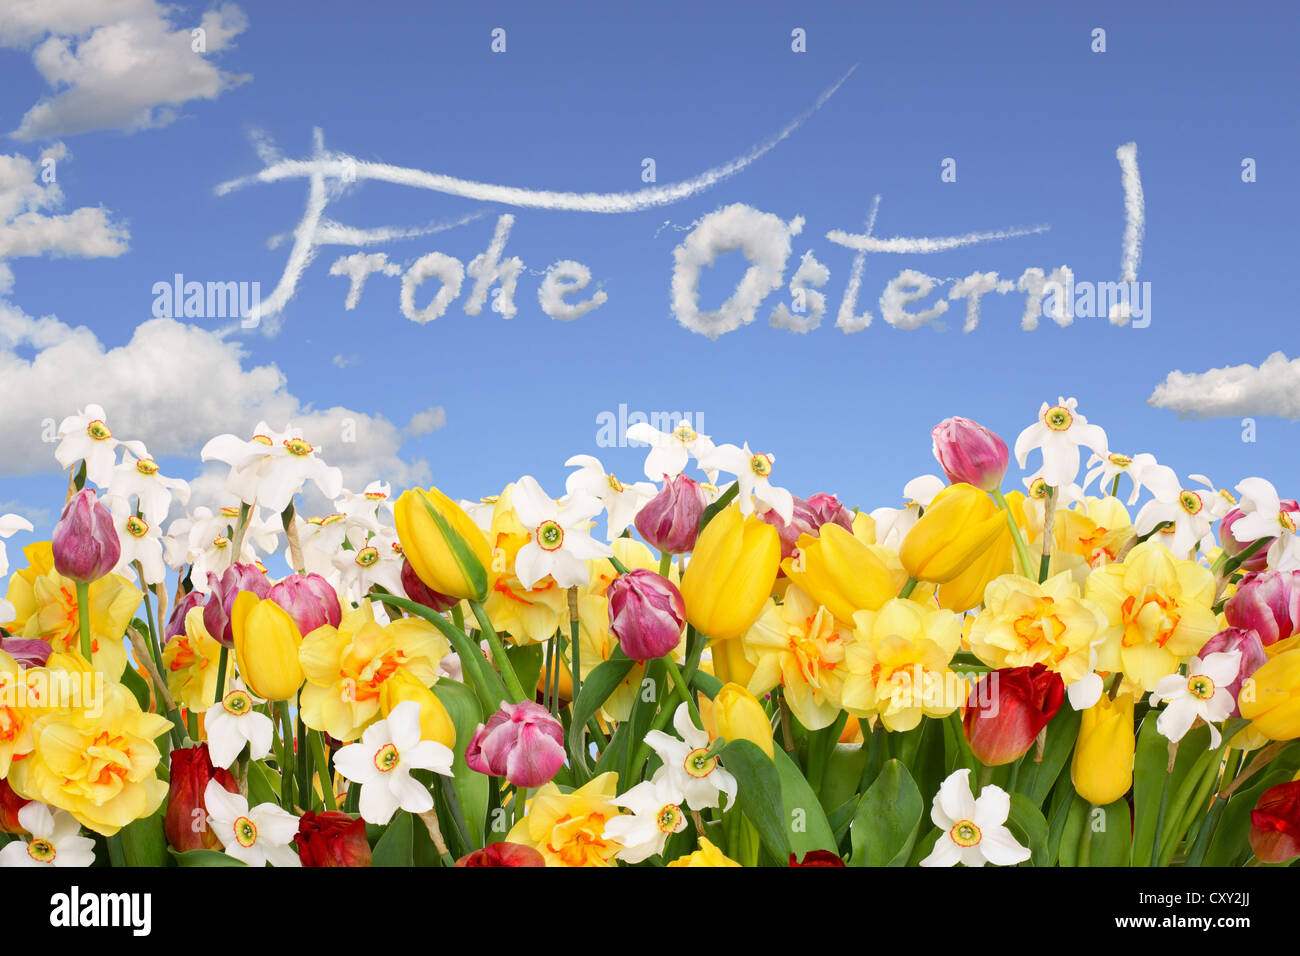 Field of flowers, lettering 'Frohe Ostern', German for 'Happy Easter' Stock Photo